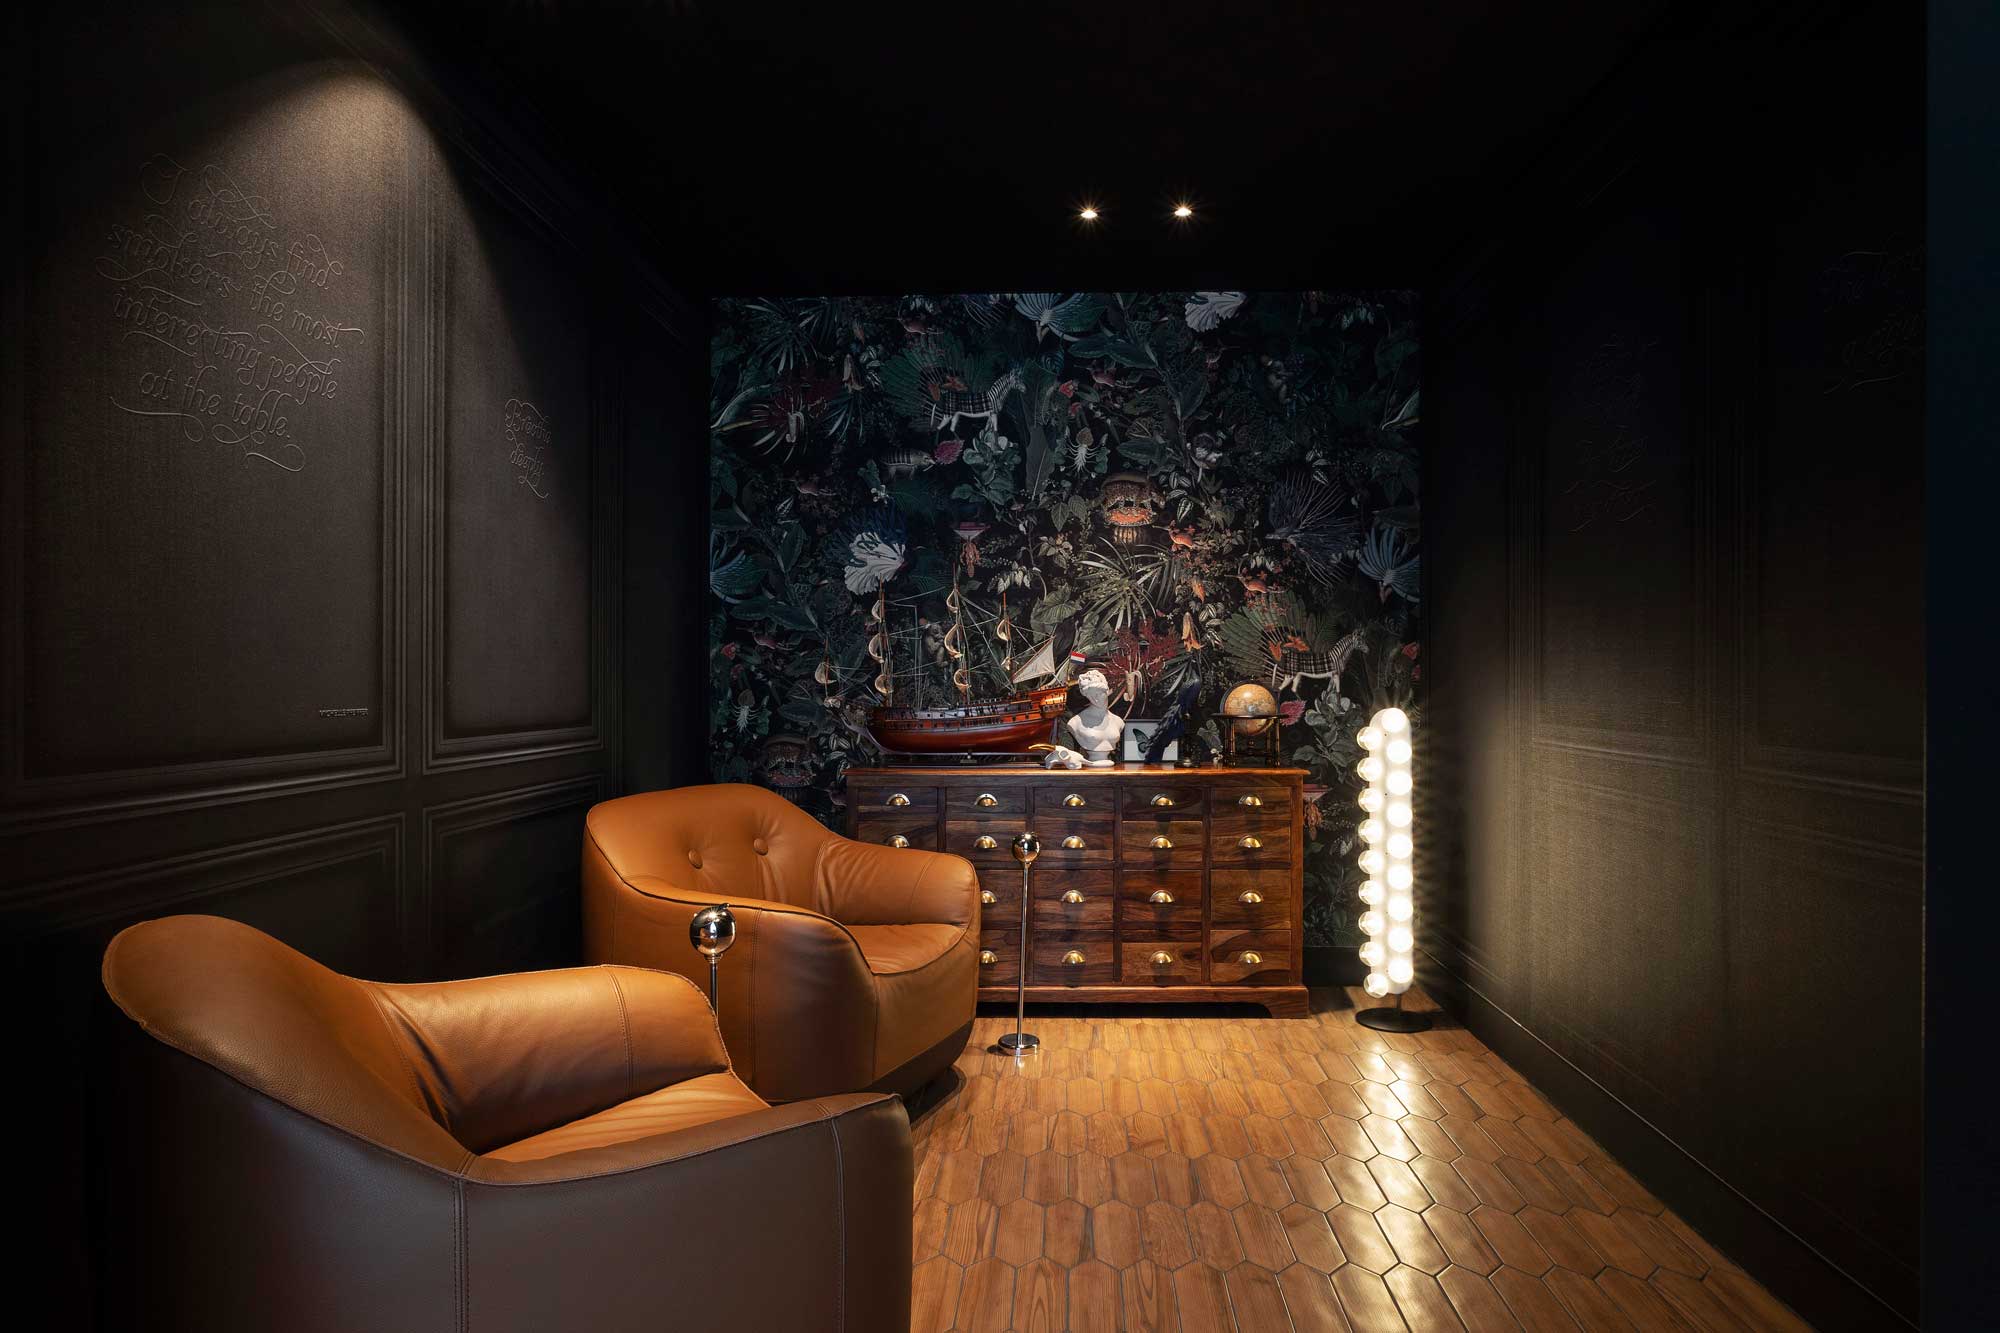 Marcel Wanders: Most Amazing Projects By The Top Interior Designer